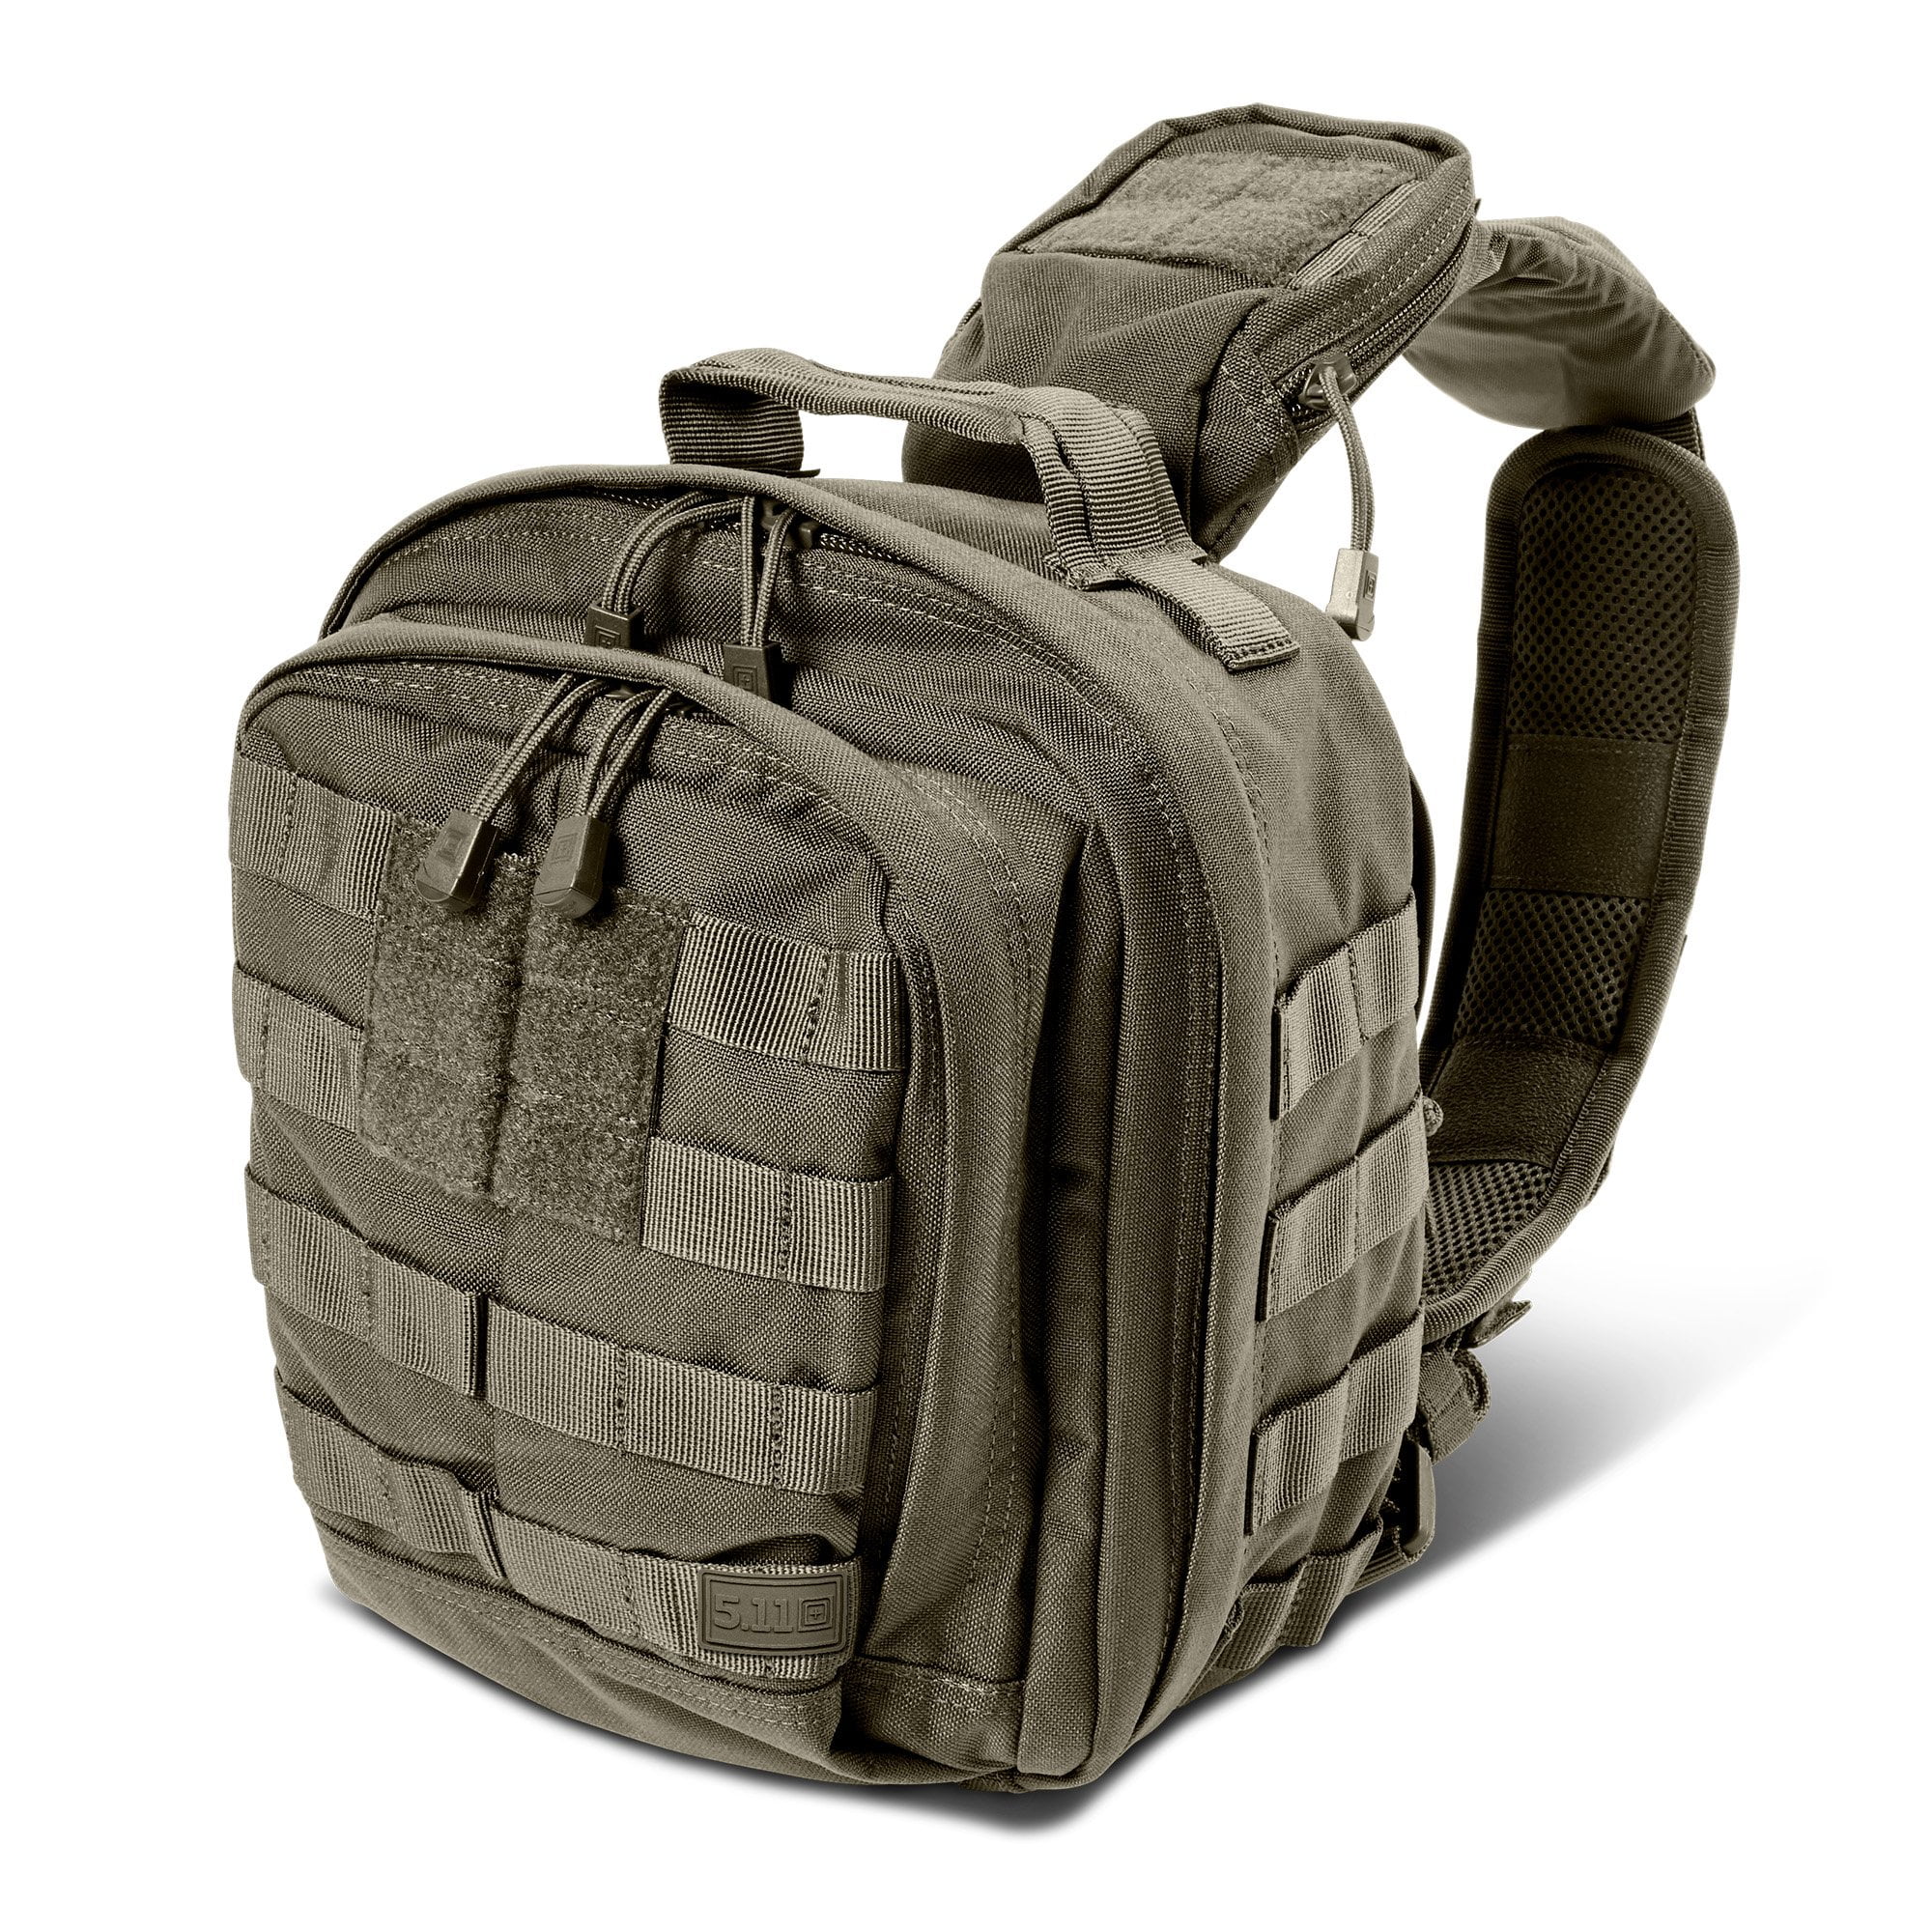 5.11 Tactical Rush MOAB 6 Sling Pack, Water-Resistant, Customizable Sling  Bag, Ranger Green, 1 SZ , Style 56963